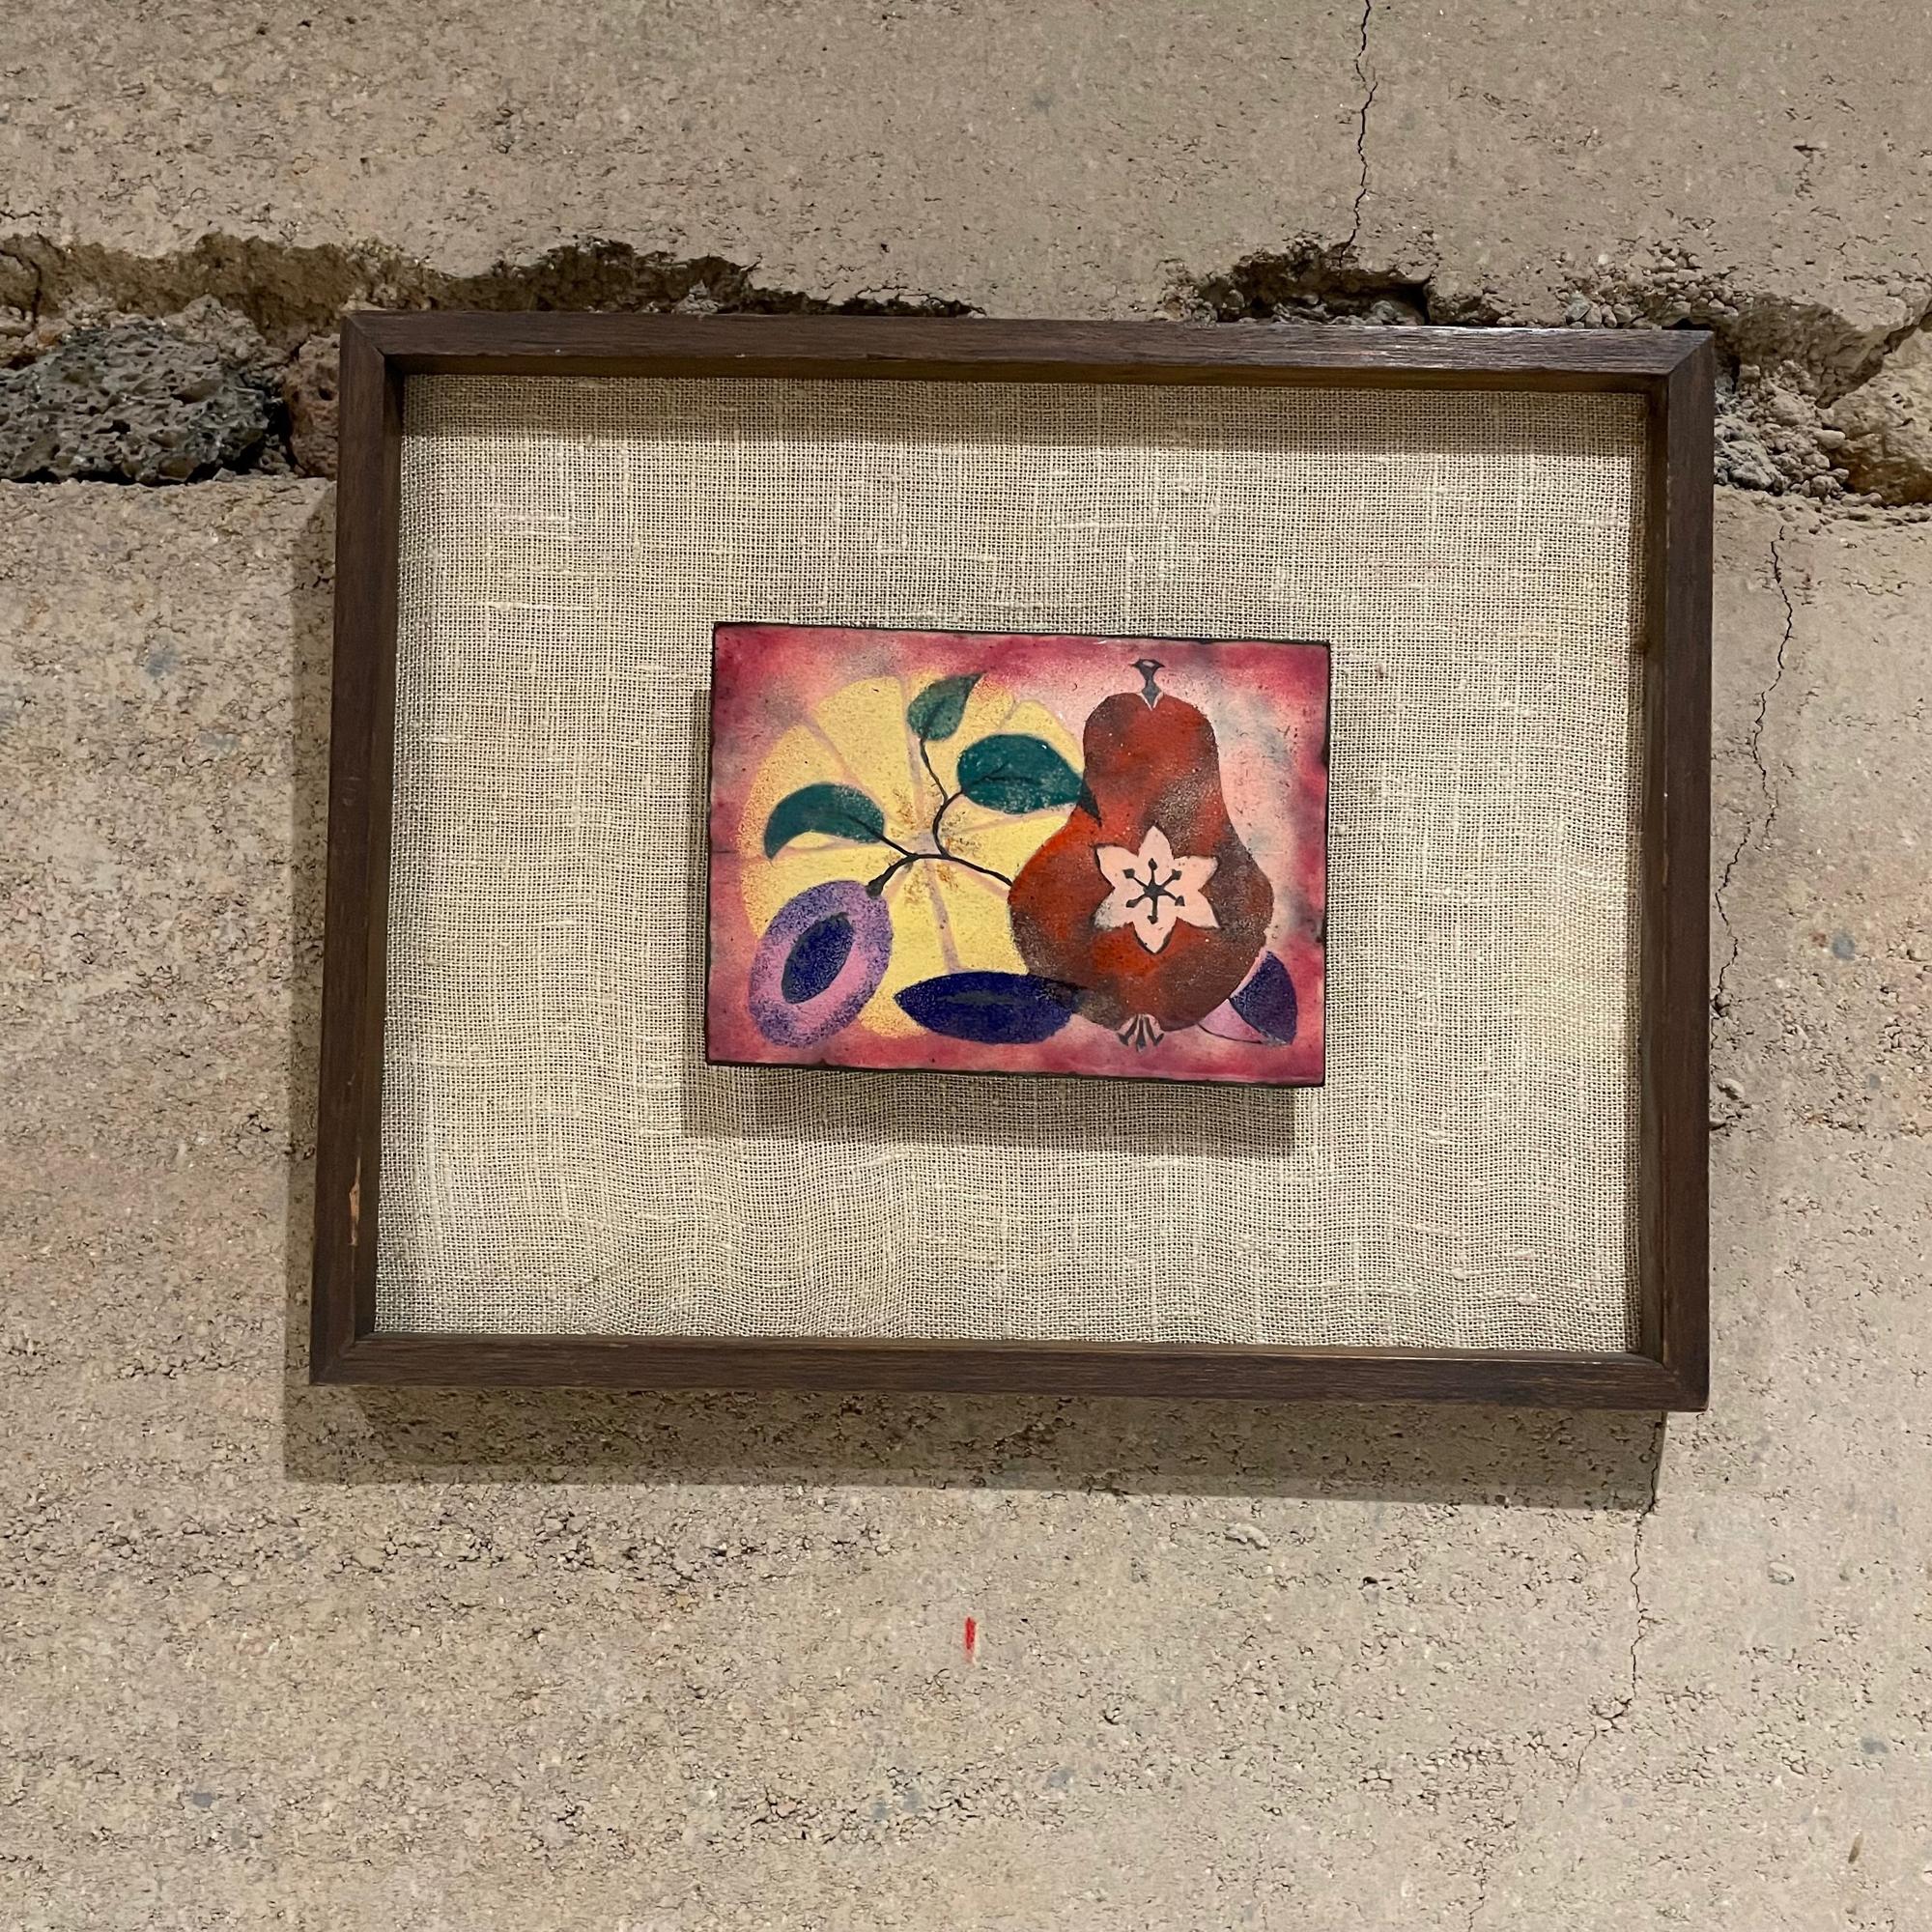 Enamel Art
Vintage midcentury Enamel wall art still life Abstract fruit on a table 1960s
Beautiful composition. Wood framed art with off white linen background.
Signed on reverse.
Measures: 9.5 tall x 11.75 w x .88 thick, Art only: 3.88 tall x